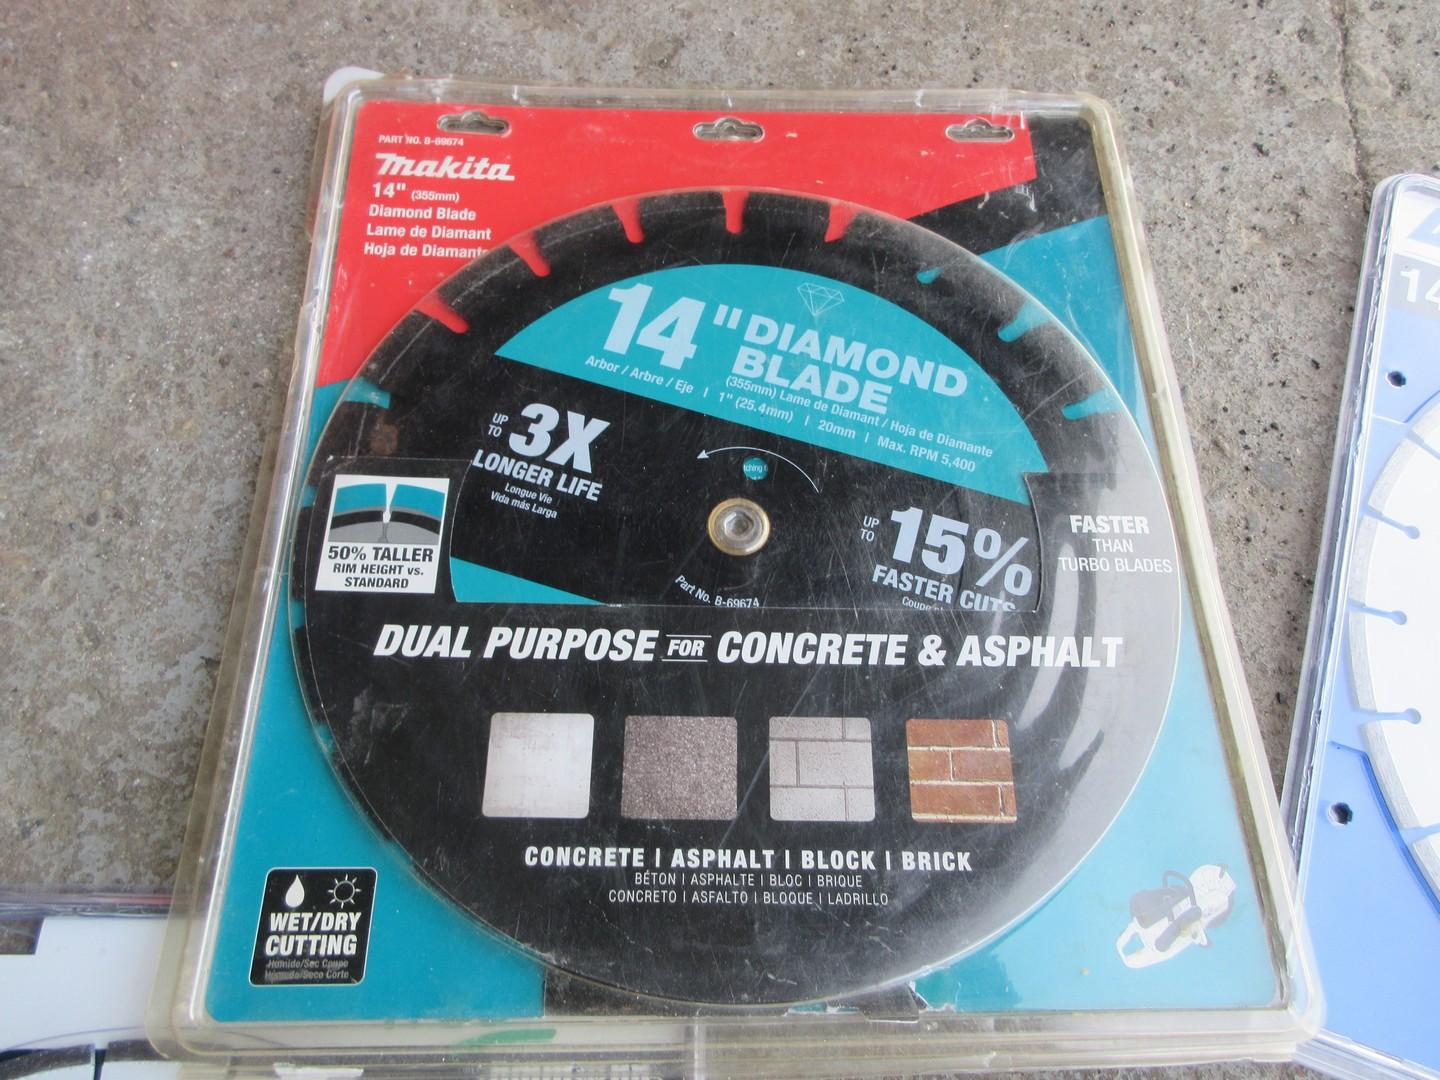 Quantity of Assorted Saw Blades